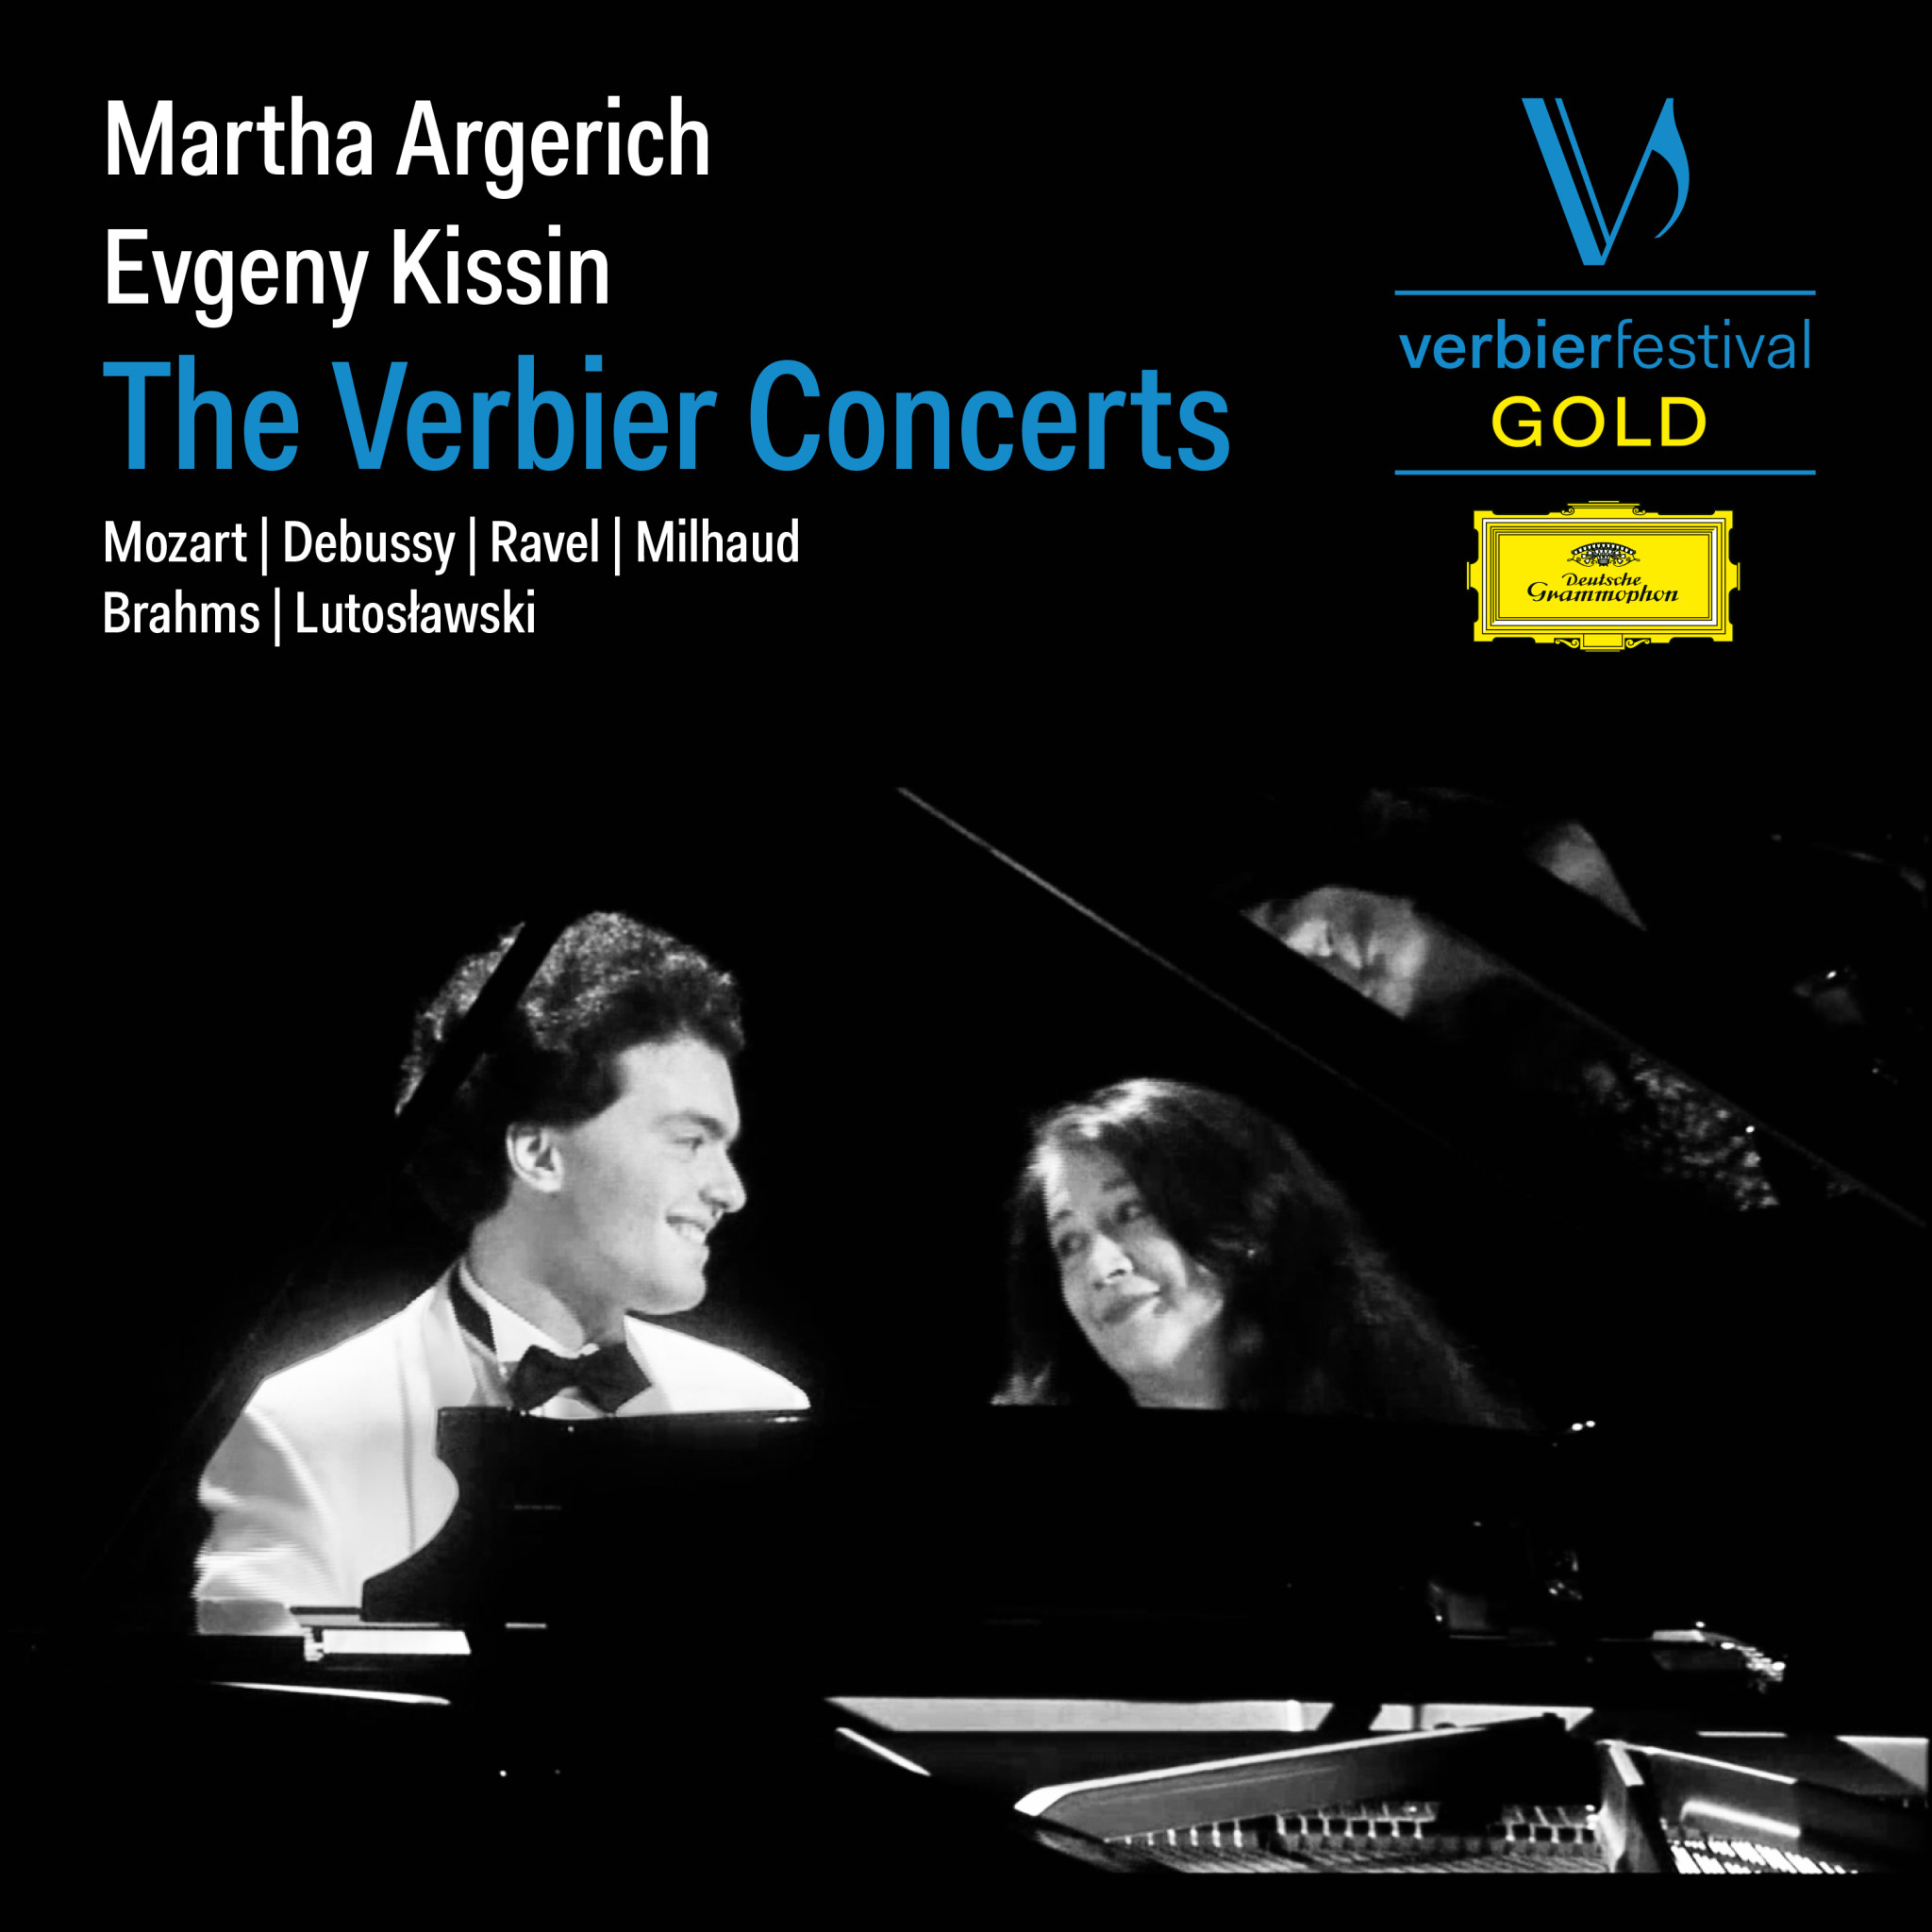 THE VERBIER CONCERTS